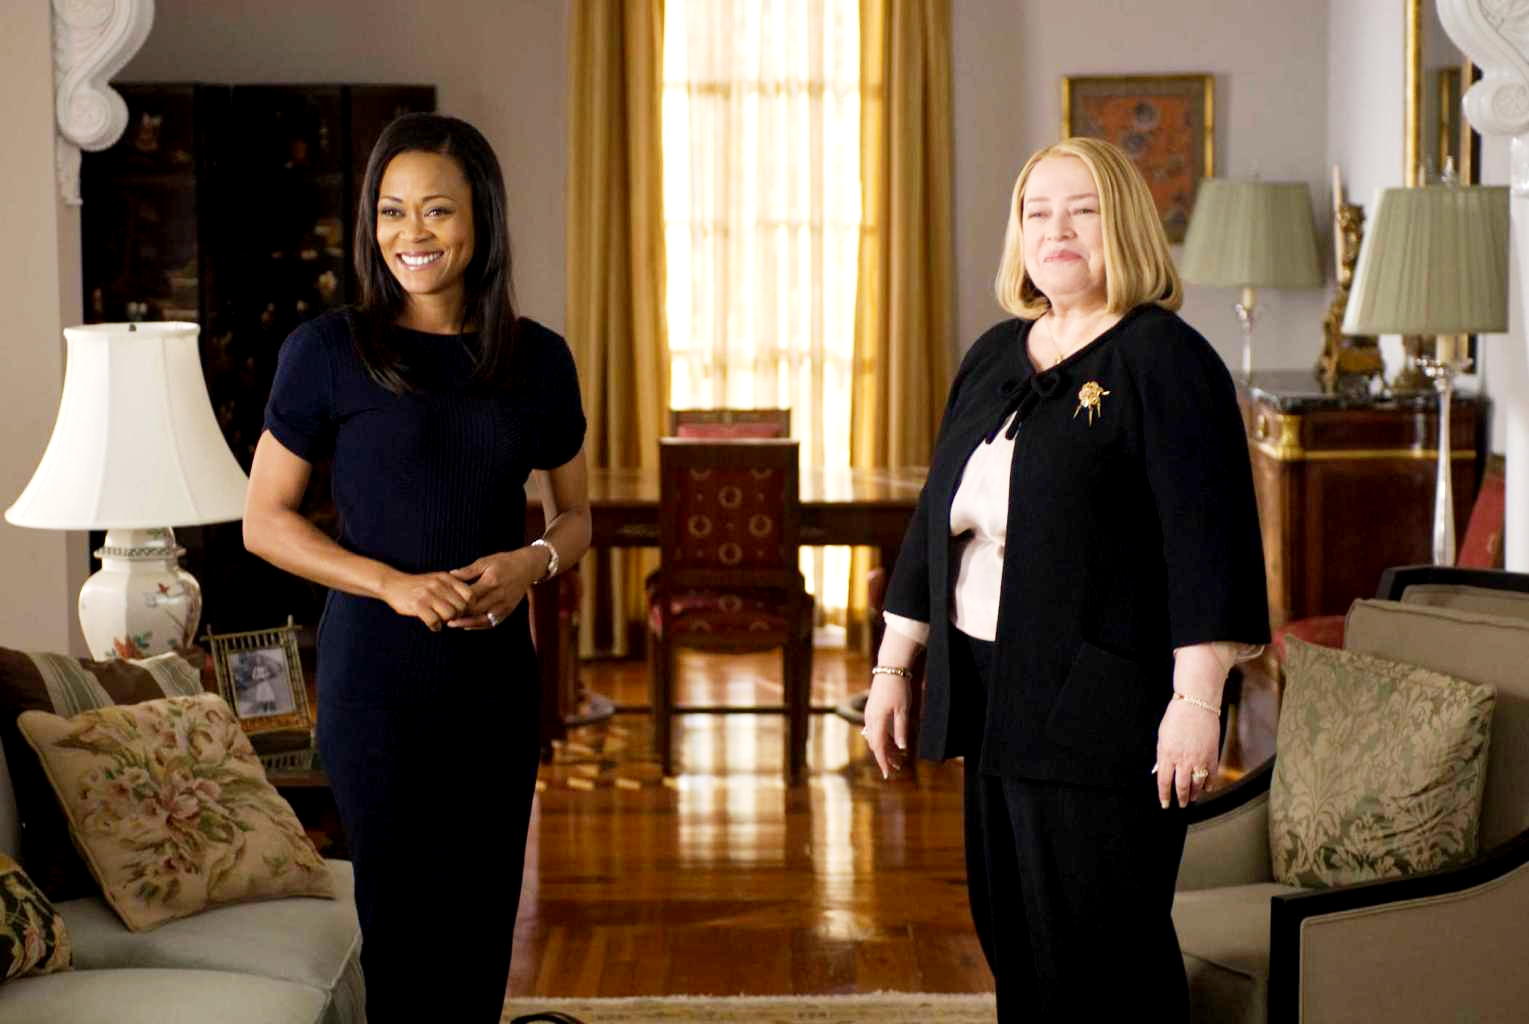 Robin Givens stars as Abby and Kathy Bates stars as Charlotte Cartwright in Lionsgate Films' The Family That Preys (2008). Photo credit by Alfeo Dixon.